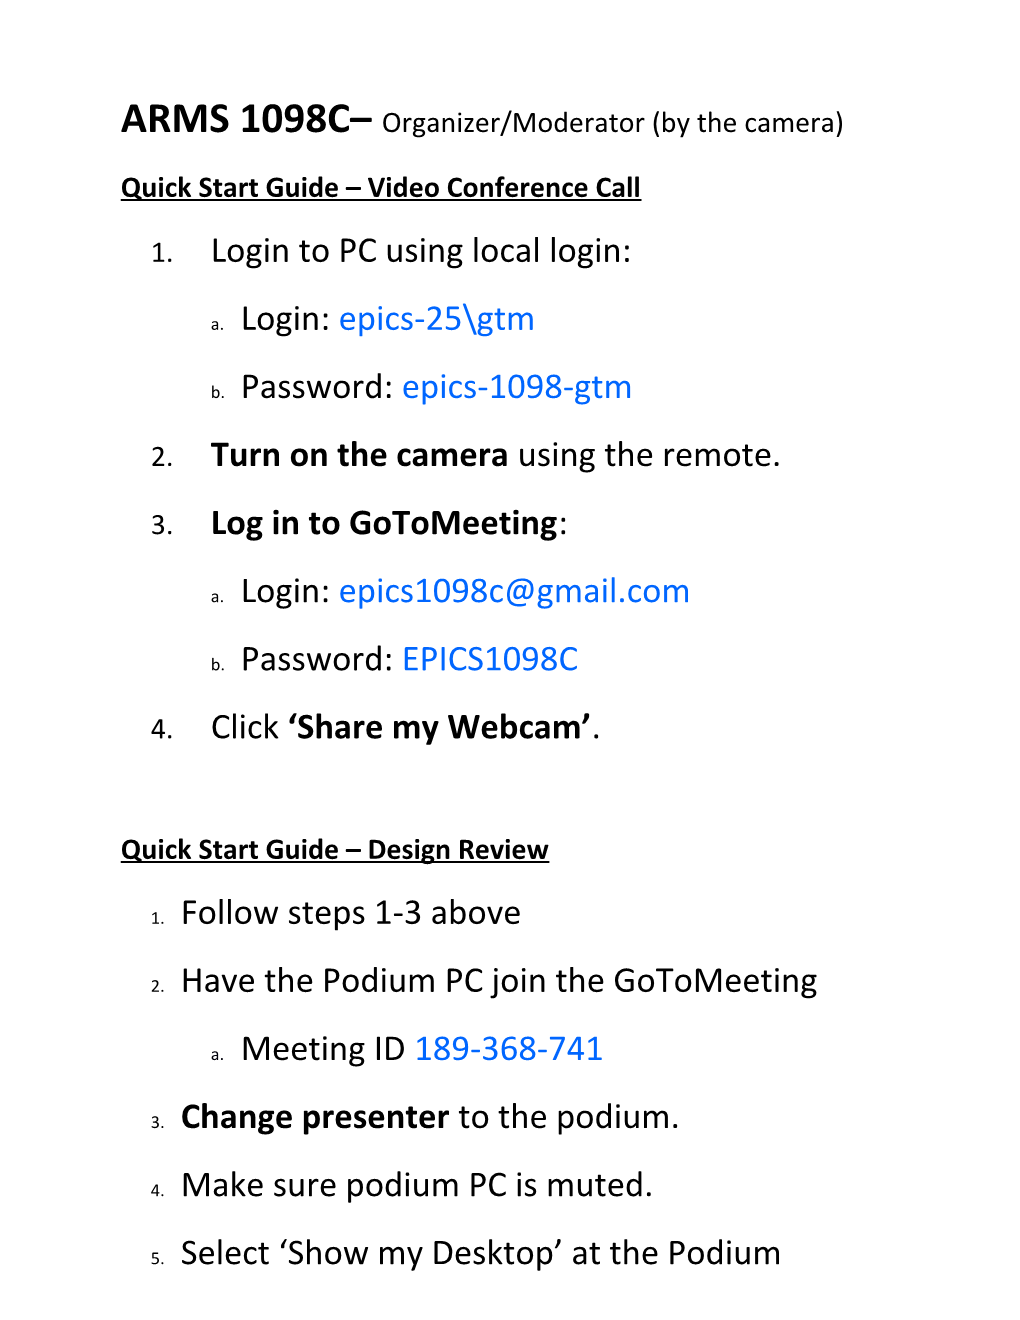 Quick Start Guide Video Conference Call